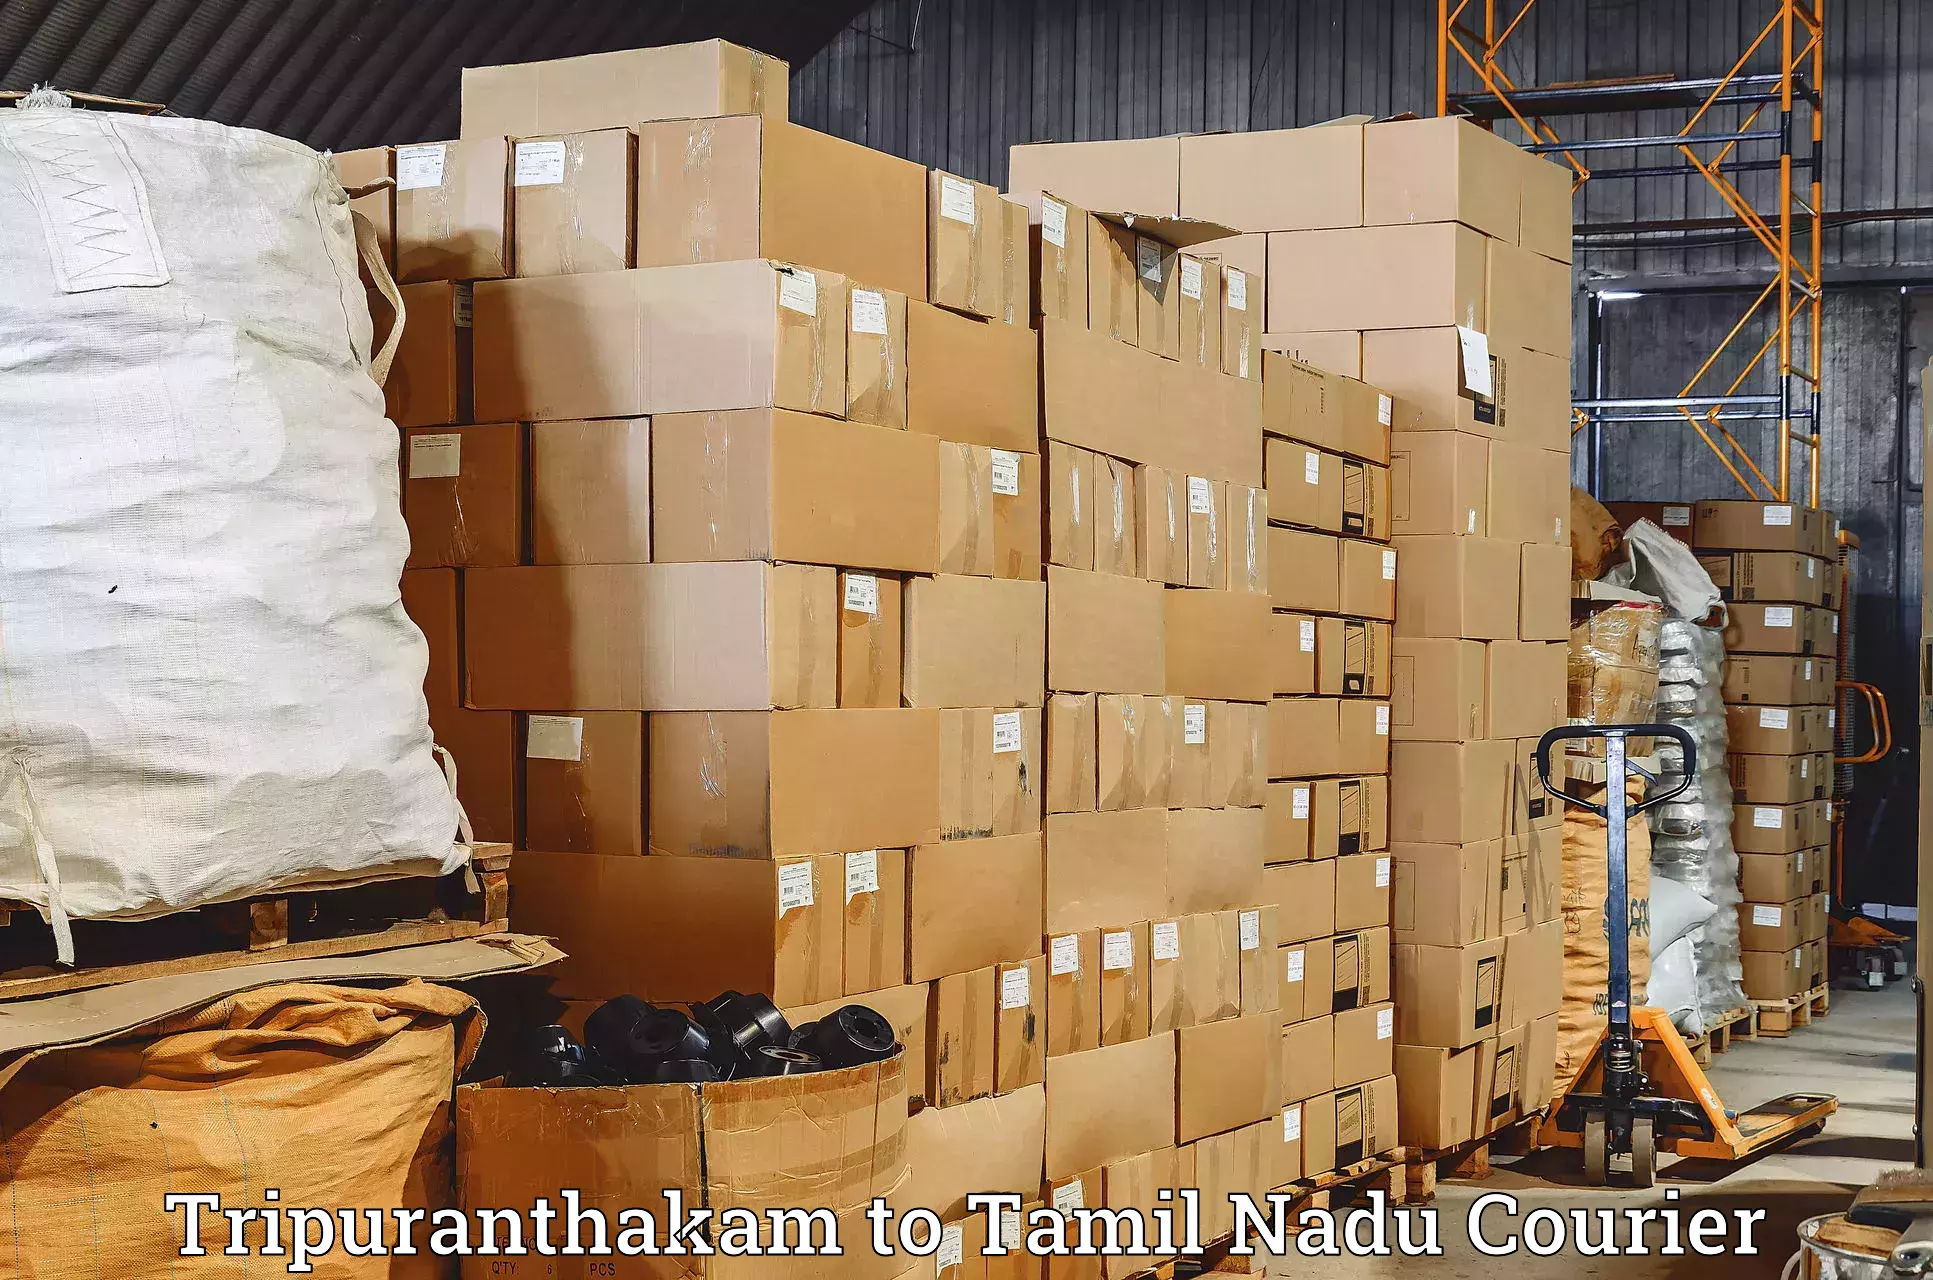 Tech-enabled shipping Tripuranthakam to Karunya Institute of Technology and Sciences Coimbatore